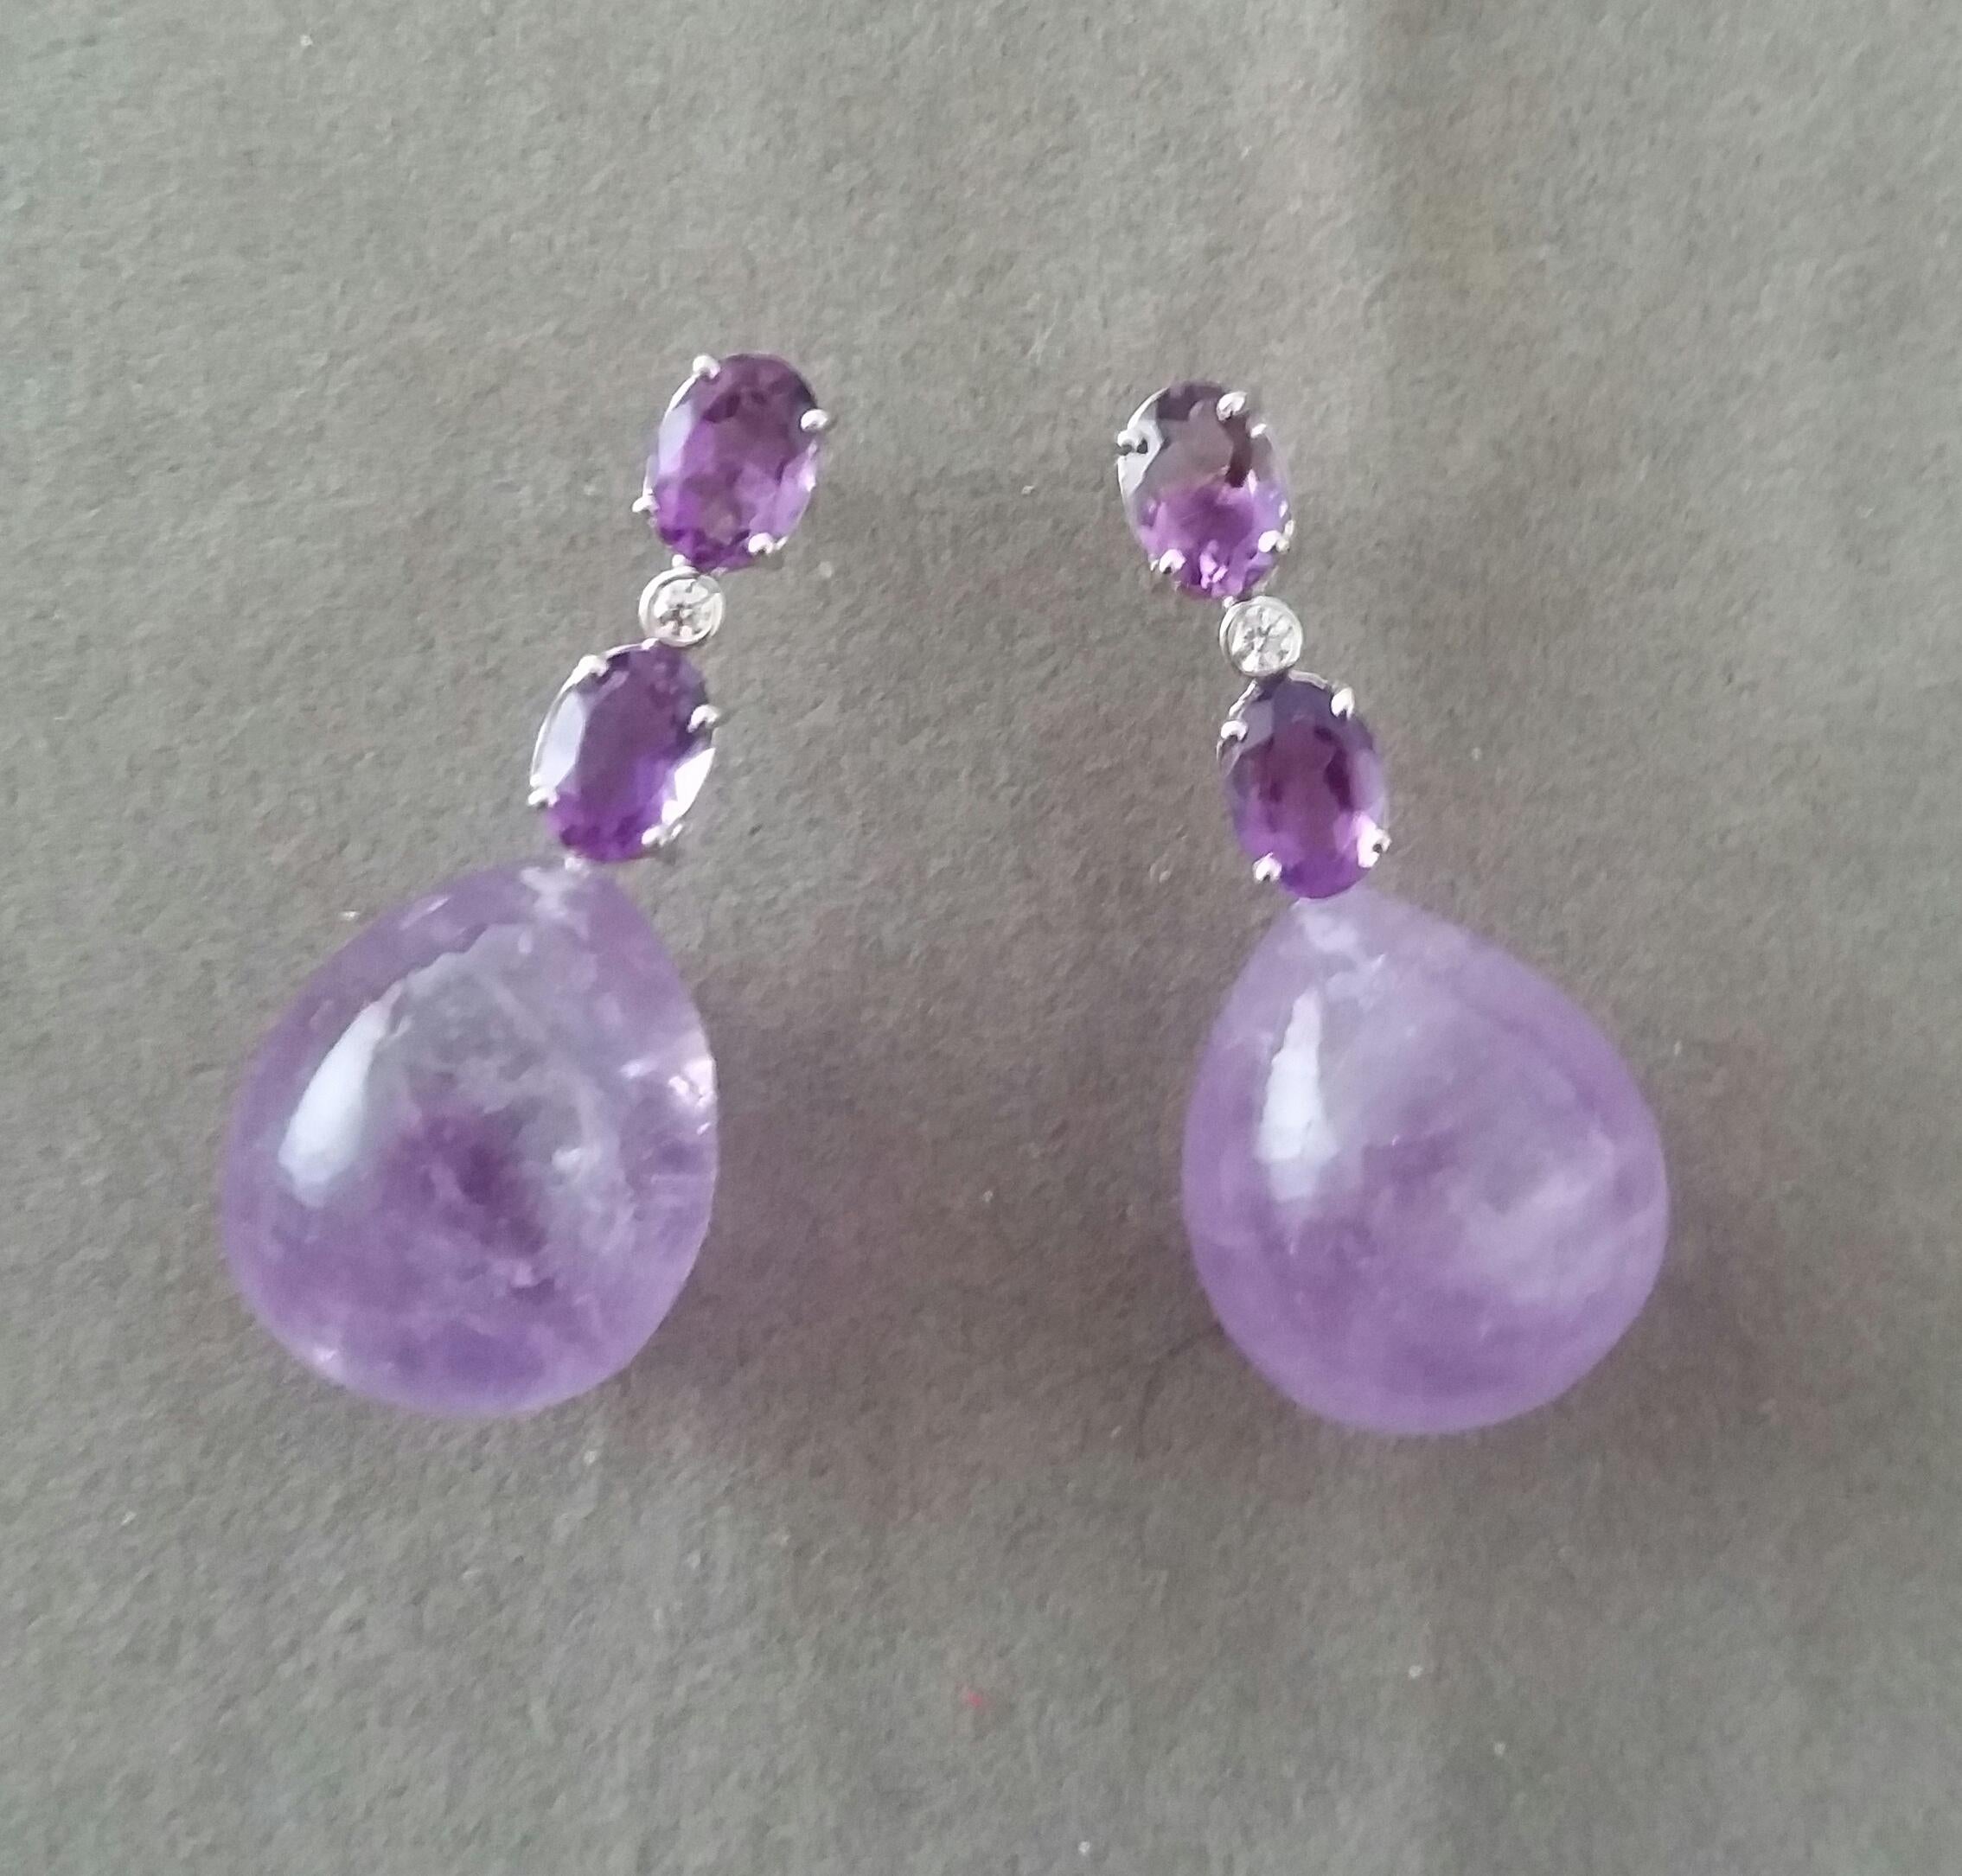 Mixed Cut 2 Oval Shape Faceted Amethyst Gold Diamonds 2 Plain Round Amethyst Drop Earrings For Sale